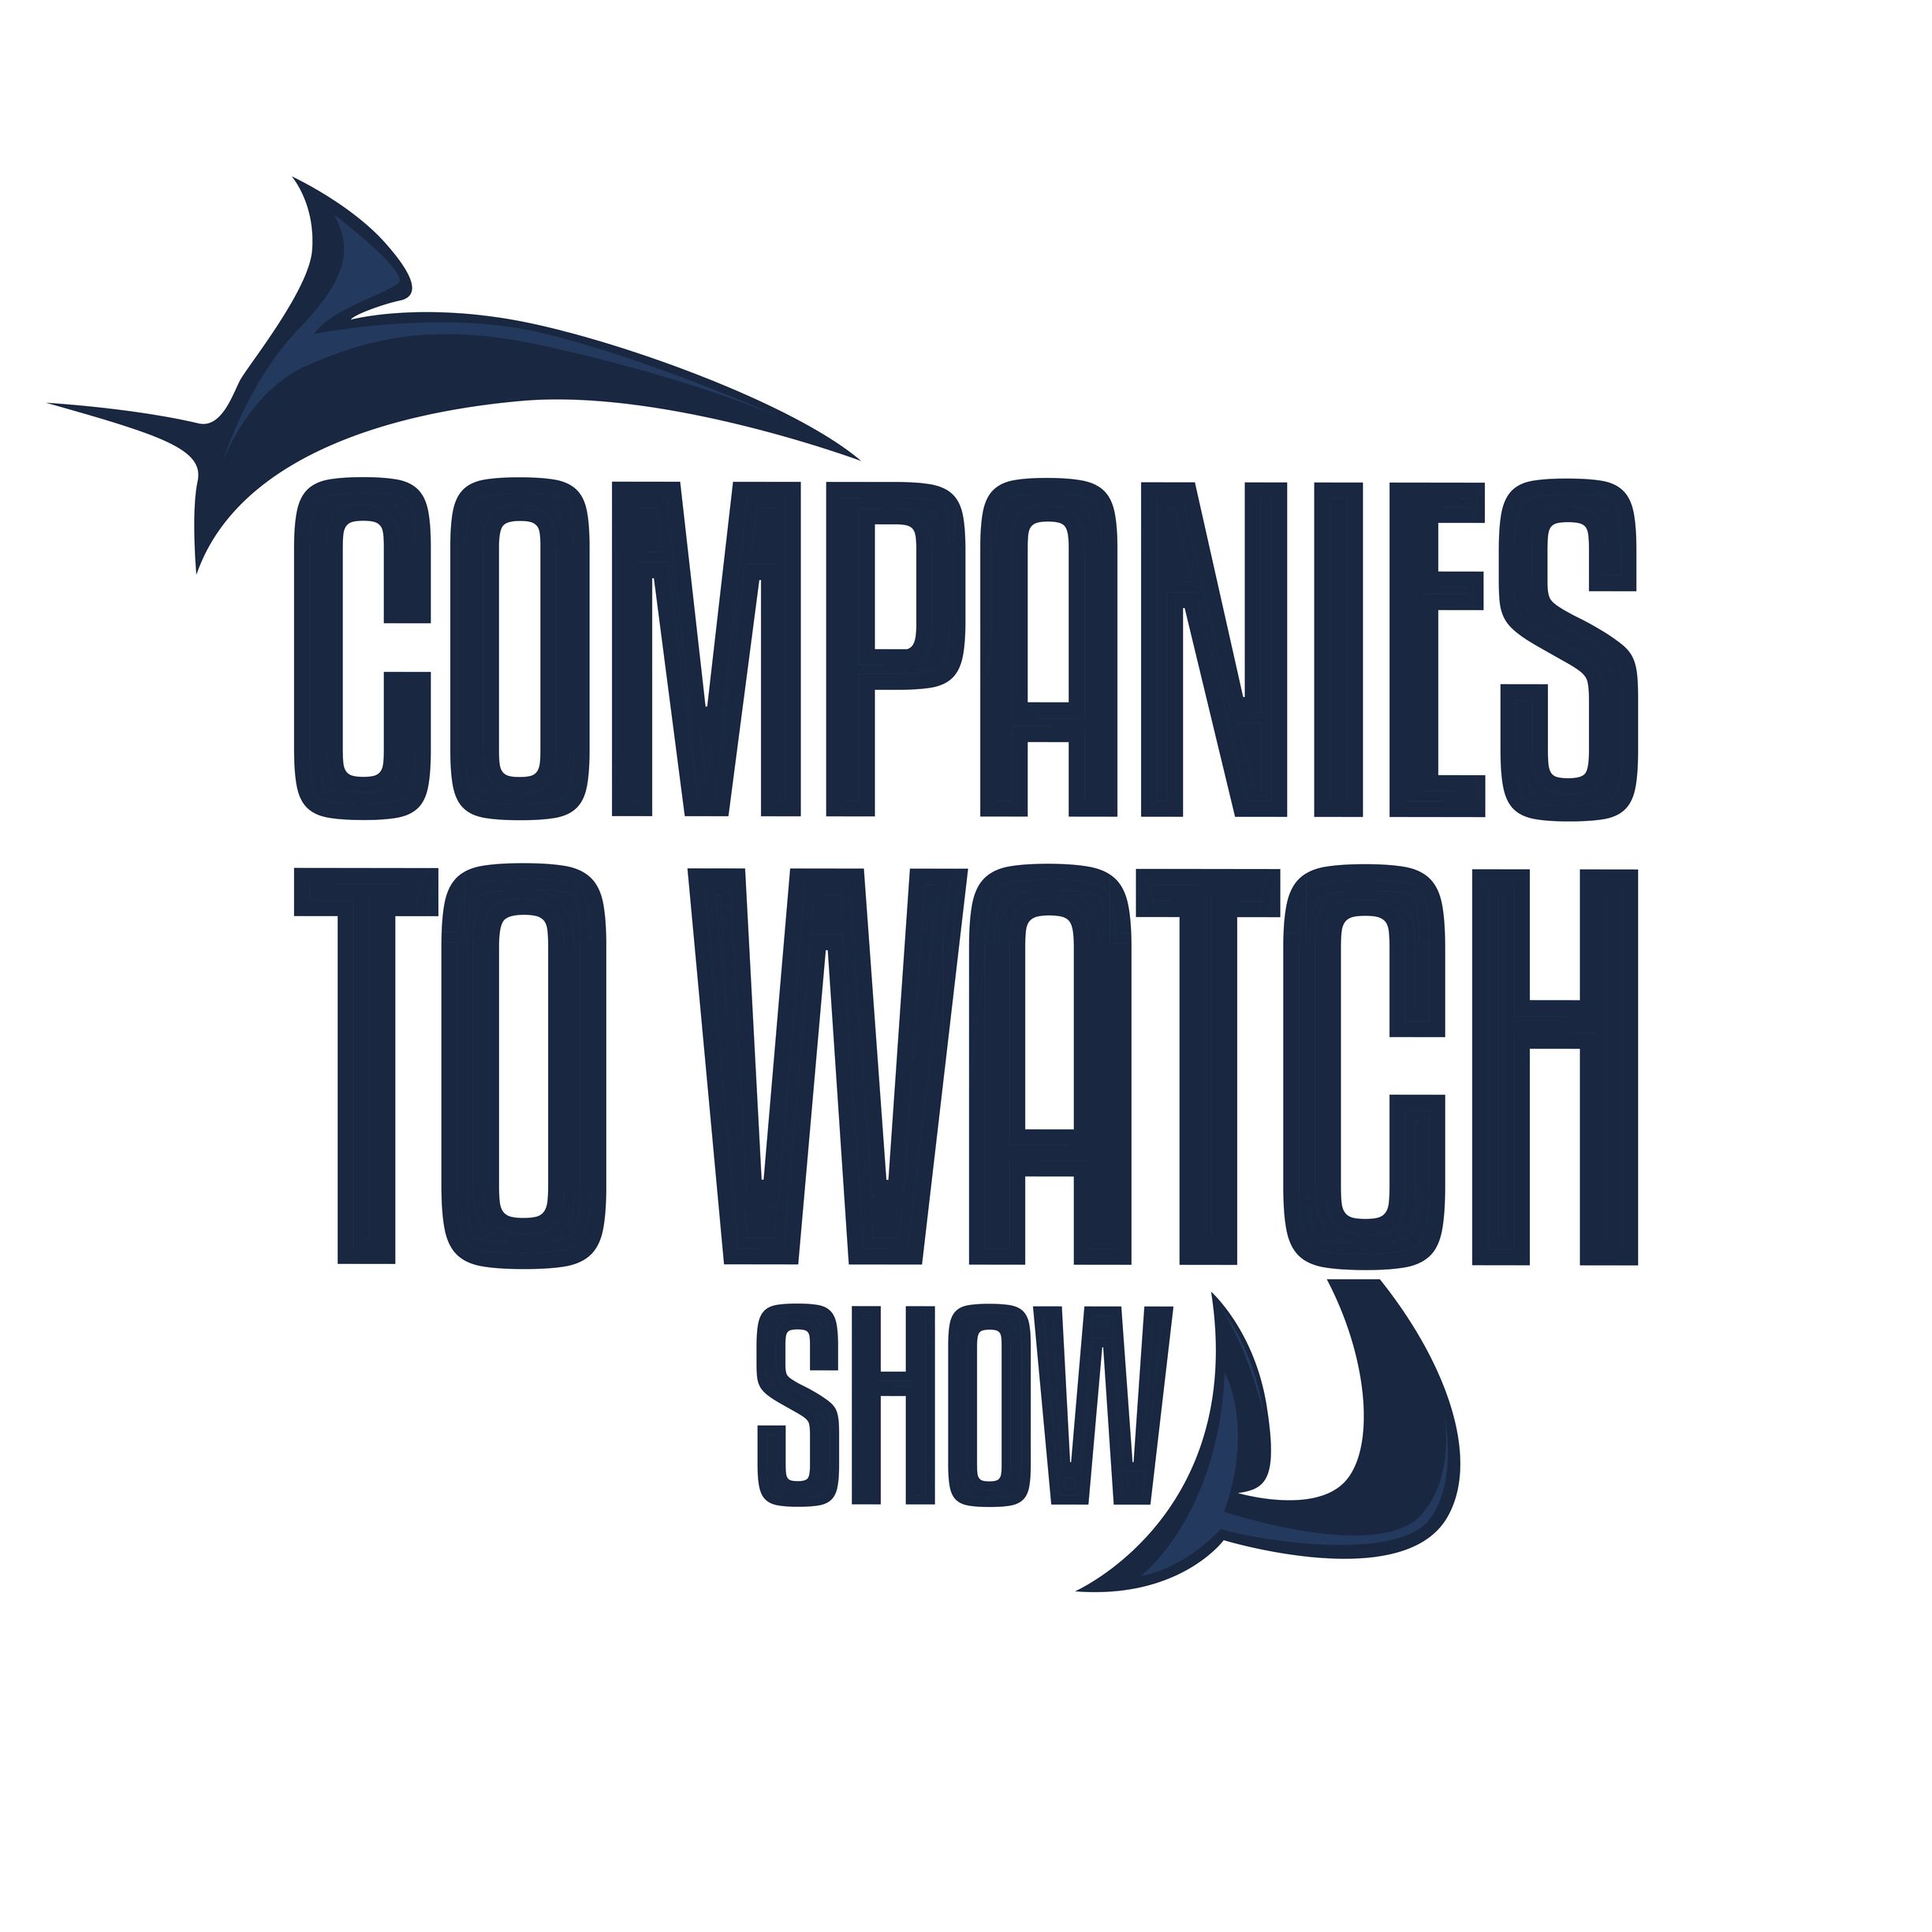 Artwork for Companies To Watch Show